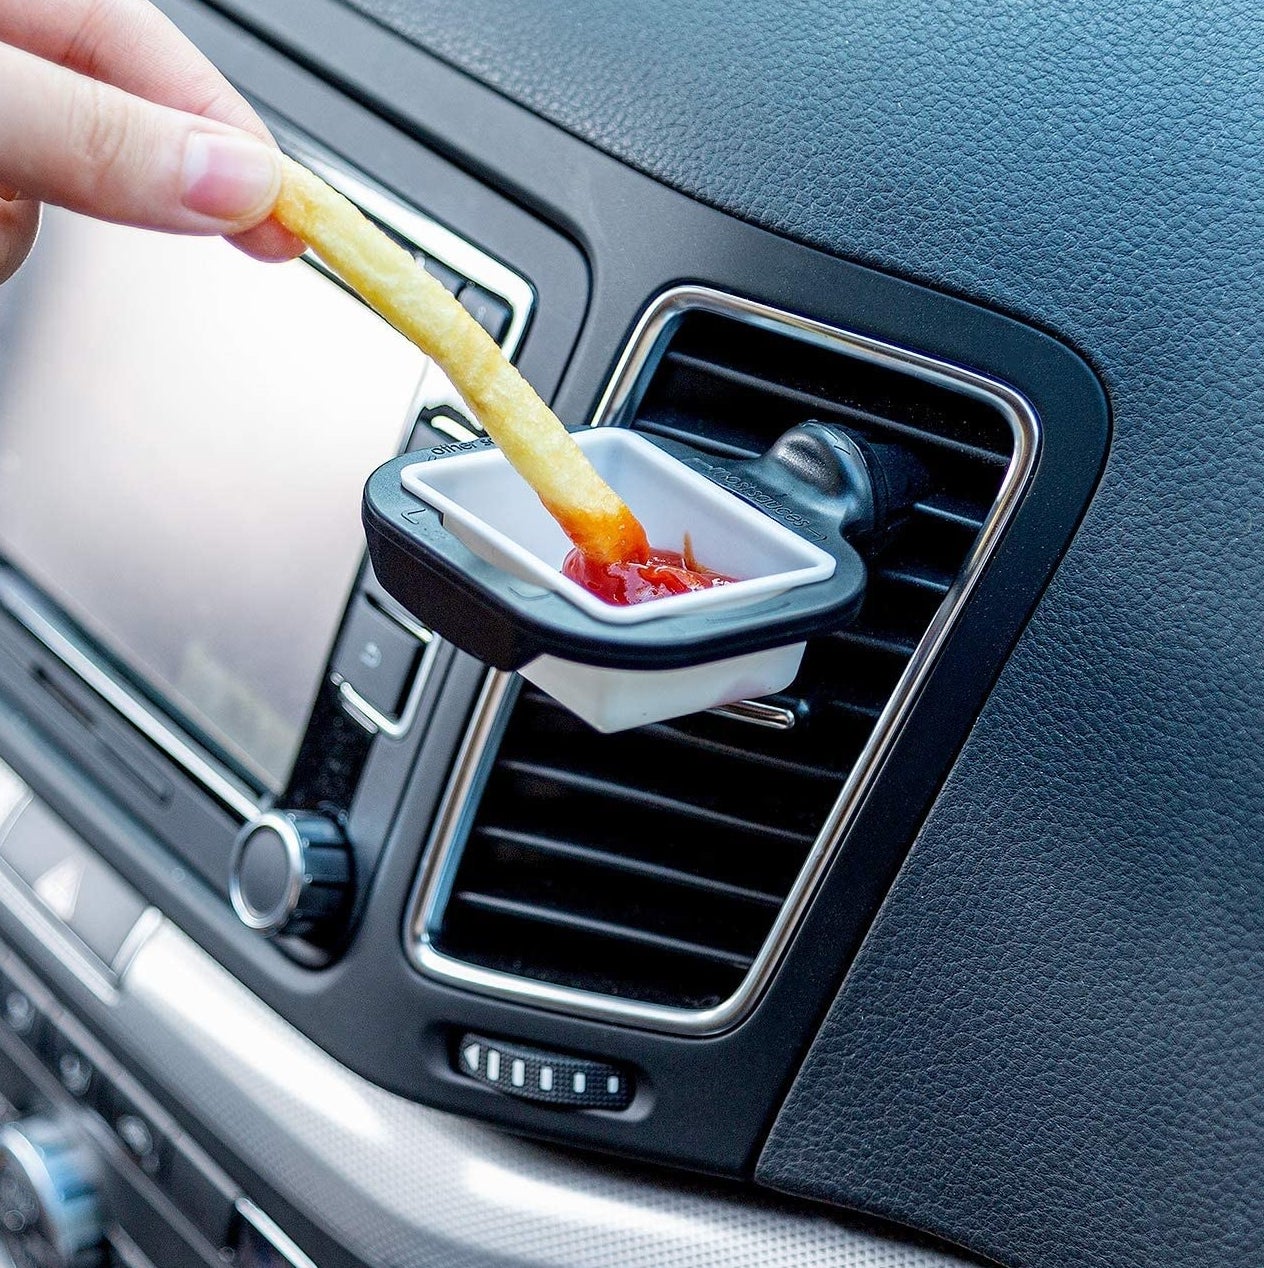 A person dipping a french fry into ketchup being held up by the holder in a car